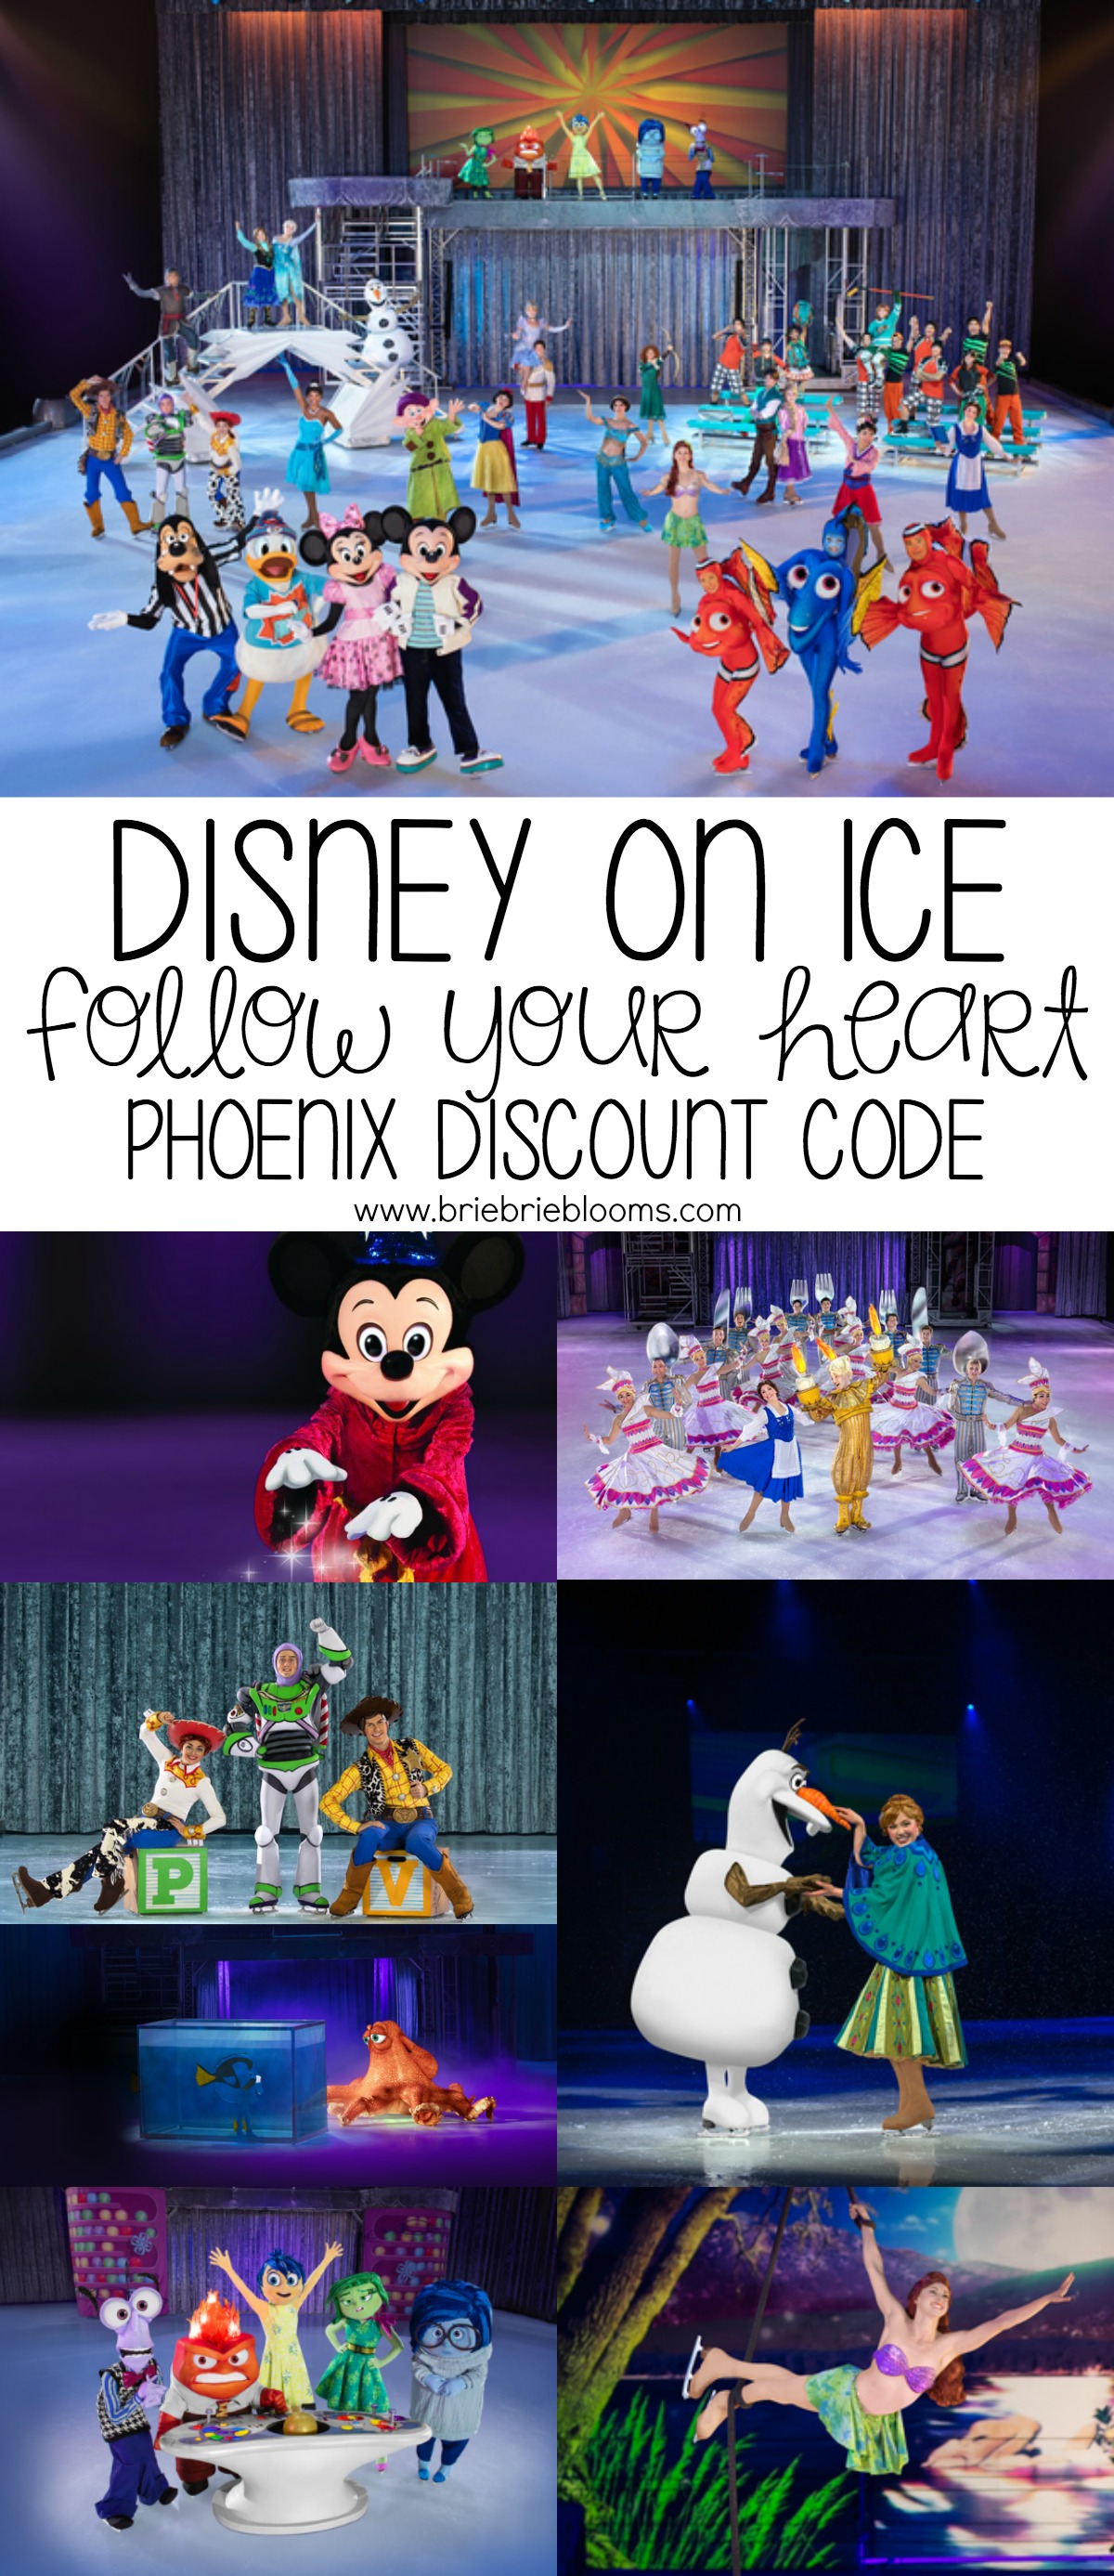 Disney On Ice Follow Your Heart is in Phoenix January 18-21. Use the Phoenix Discount Code for 20% off your tickets to see favorite Disney•Pixar characters.